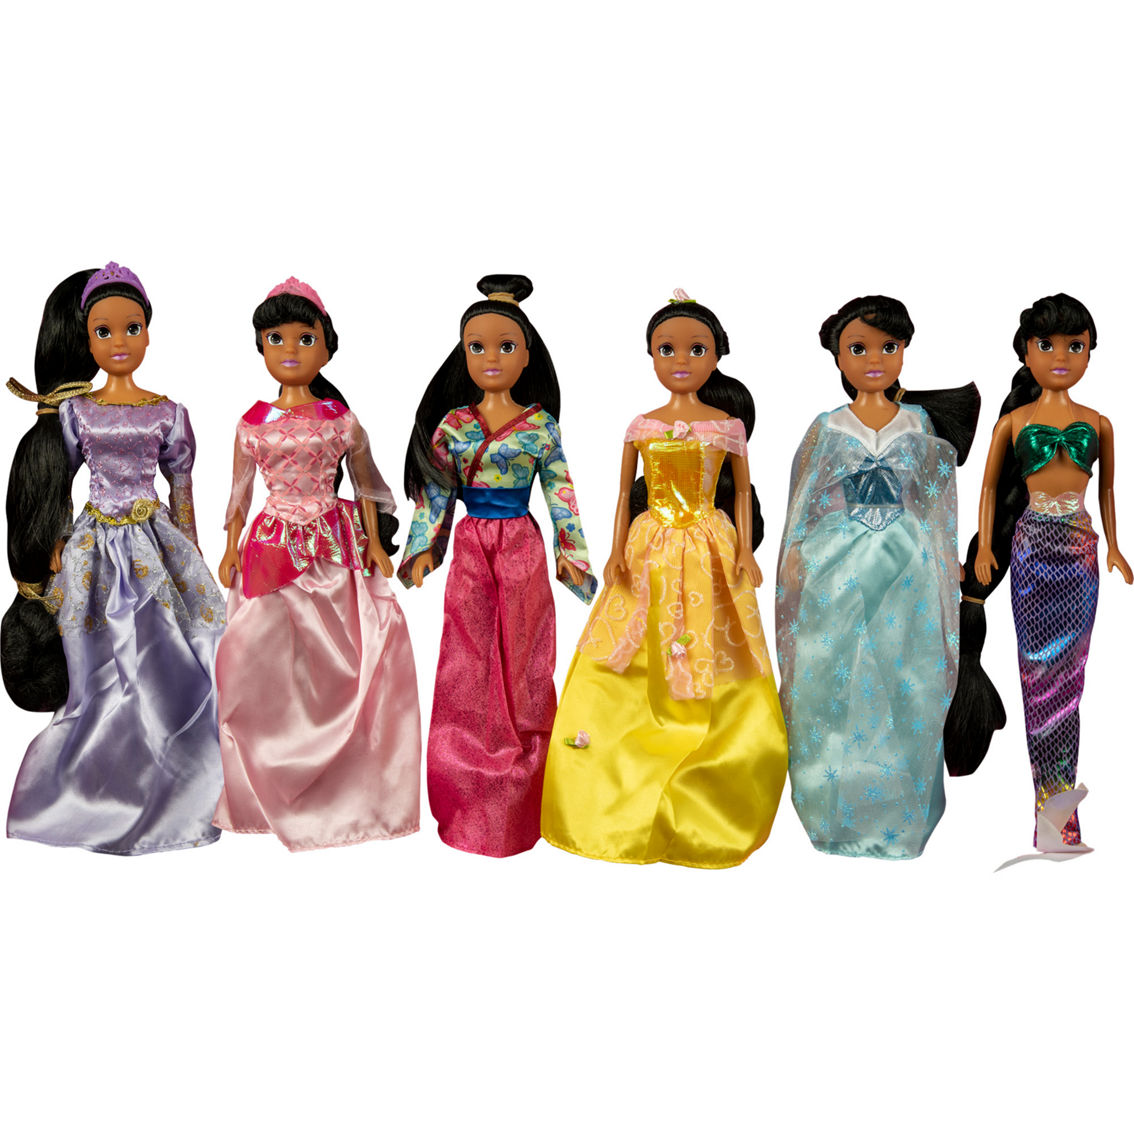 Smart Talent 11.5 in. Princess Dolls 6 pc. Gift Set - Image 2 of 2